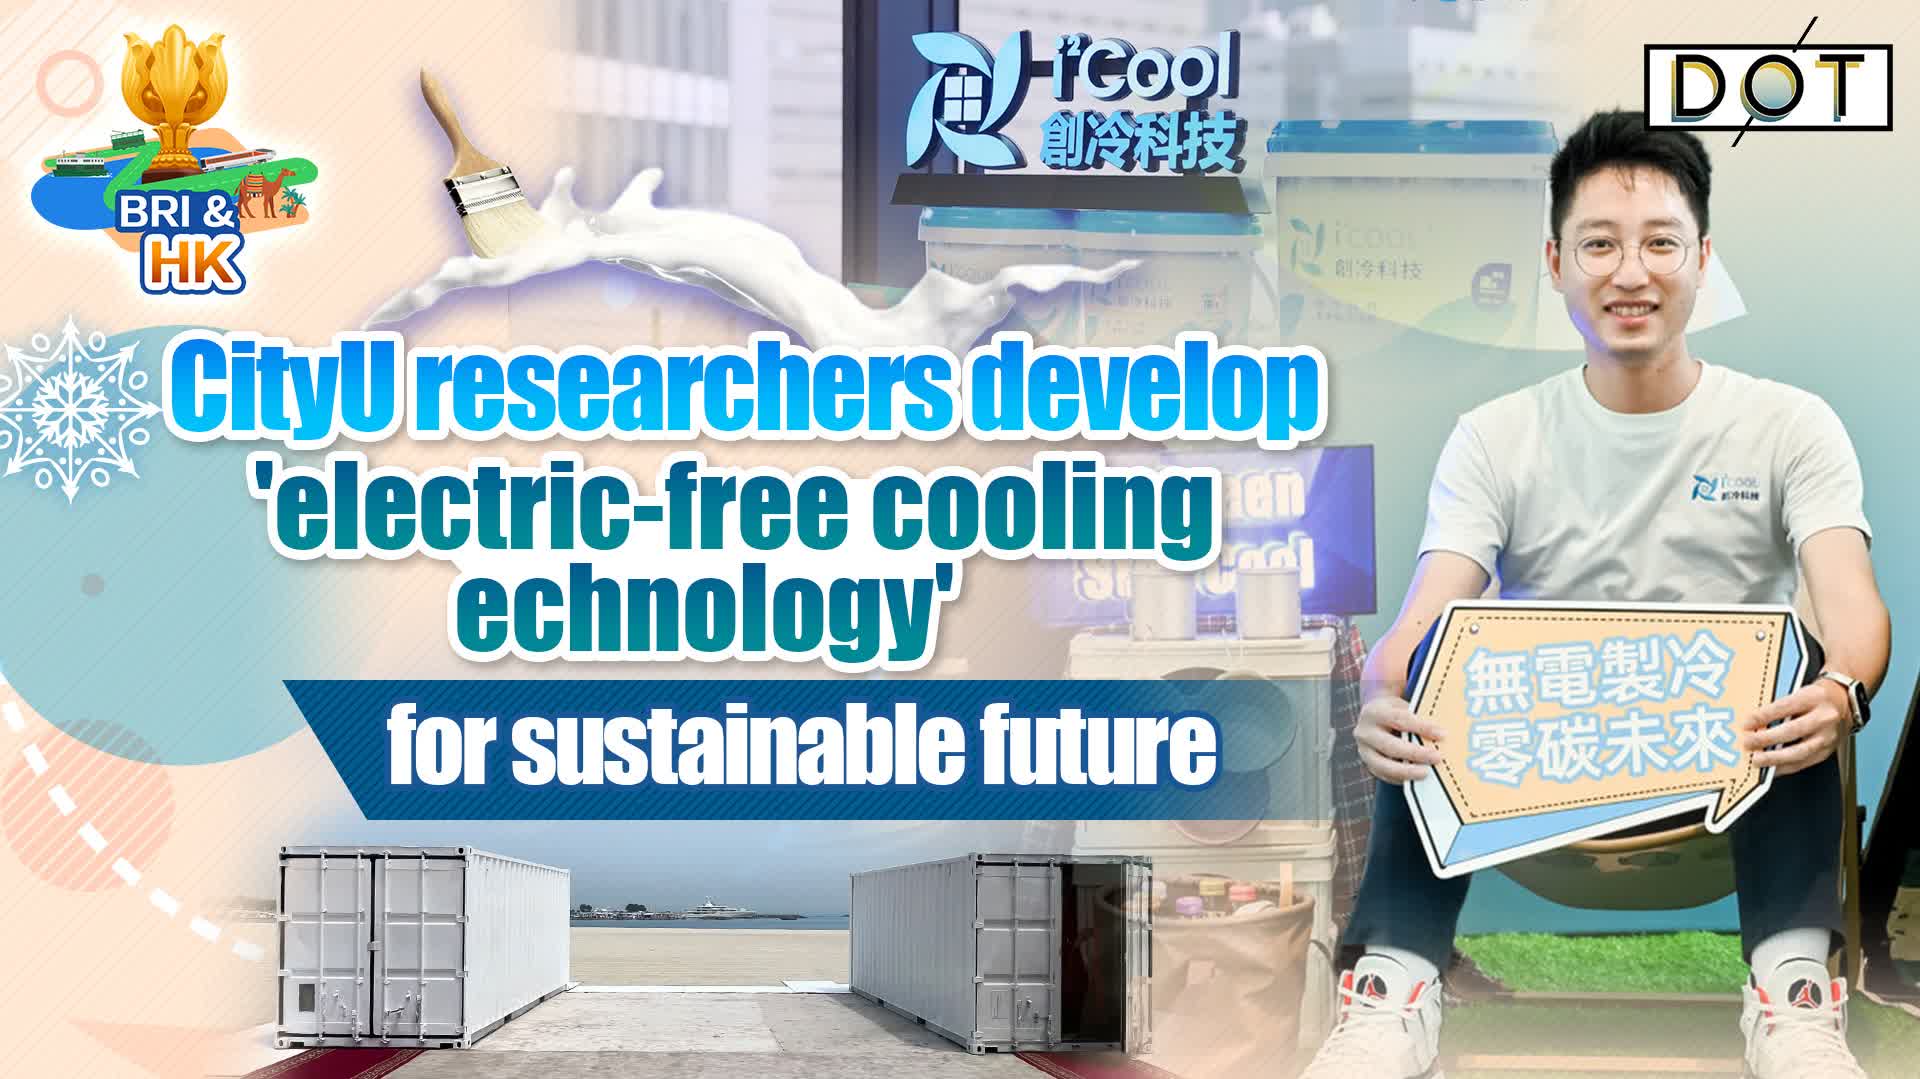 BRI & HK | CityU researchers develop 'electric-free cooling technology' for sustainable future